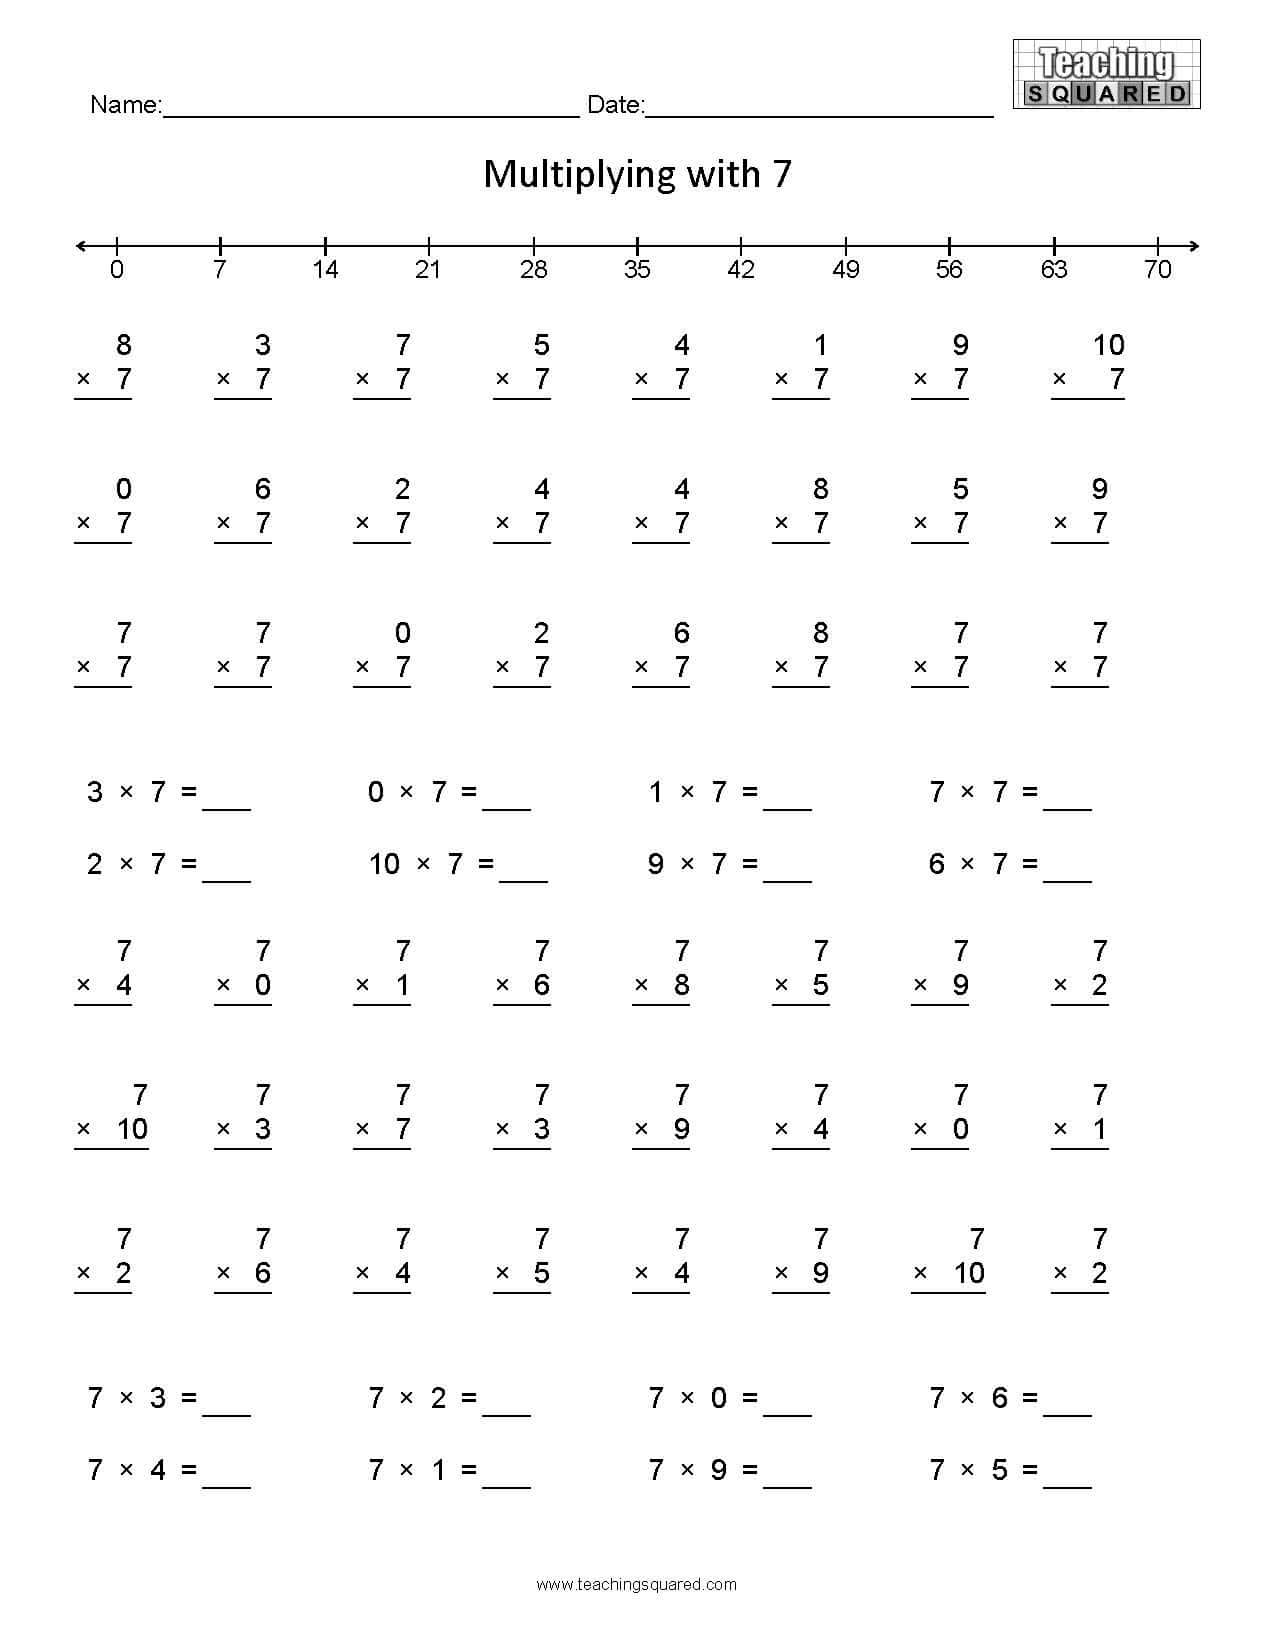 Multiplying with 7 multiplication worksheets